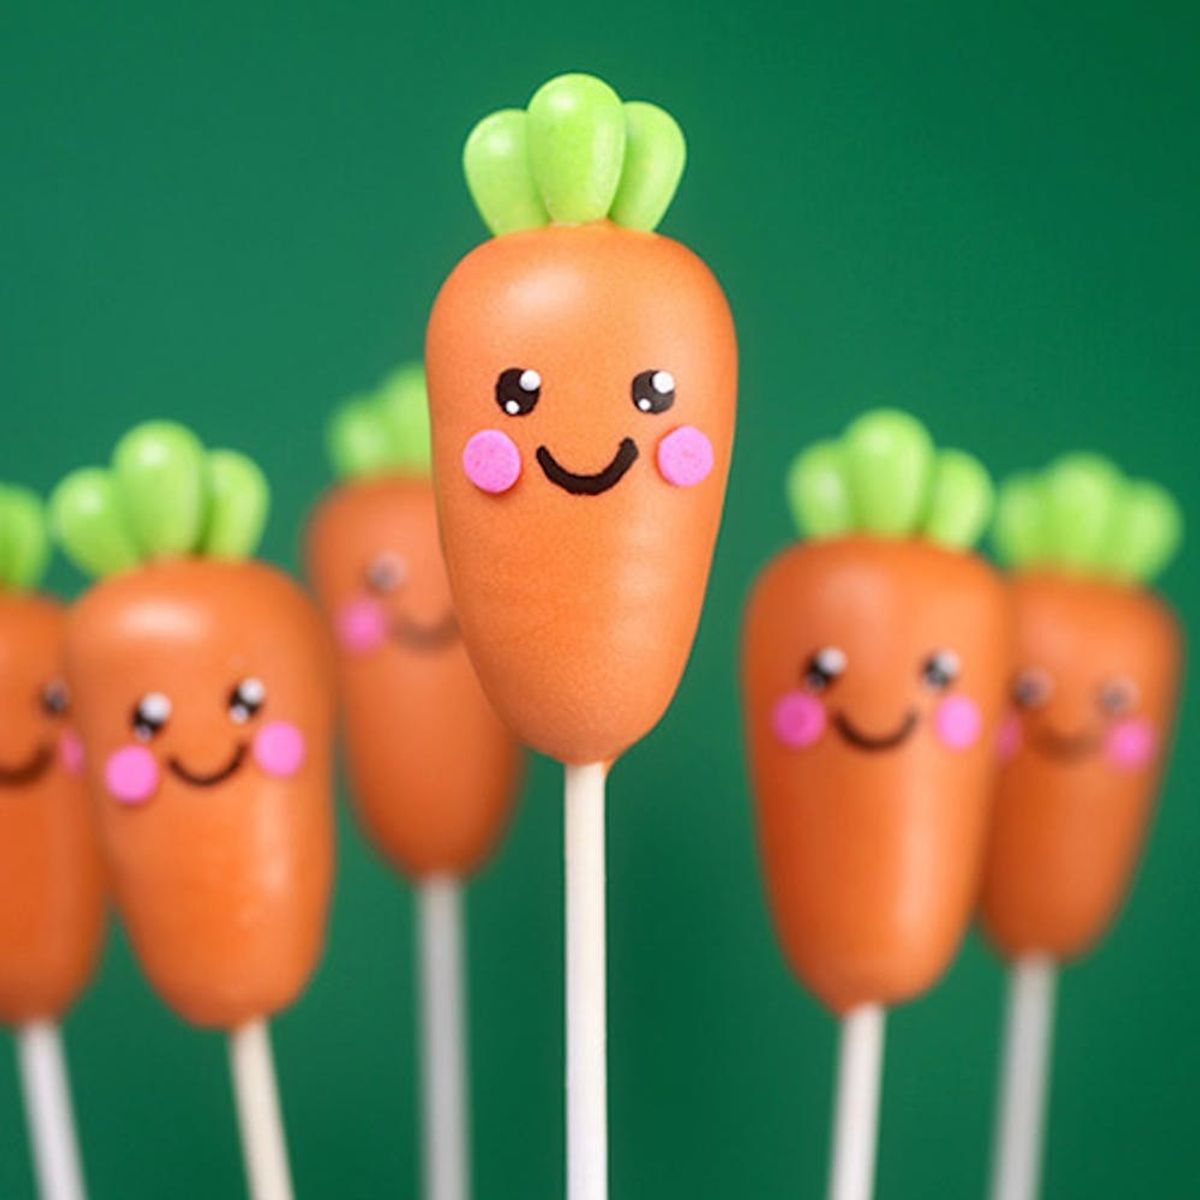 10 Carrot-Shaped Desserts Every Bunny Will Love